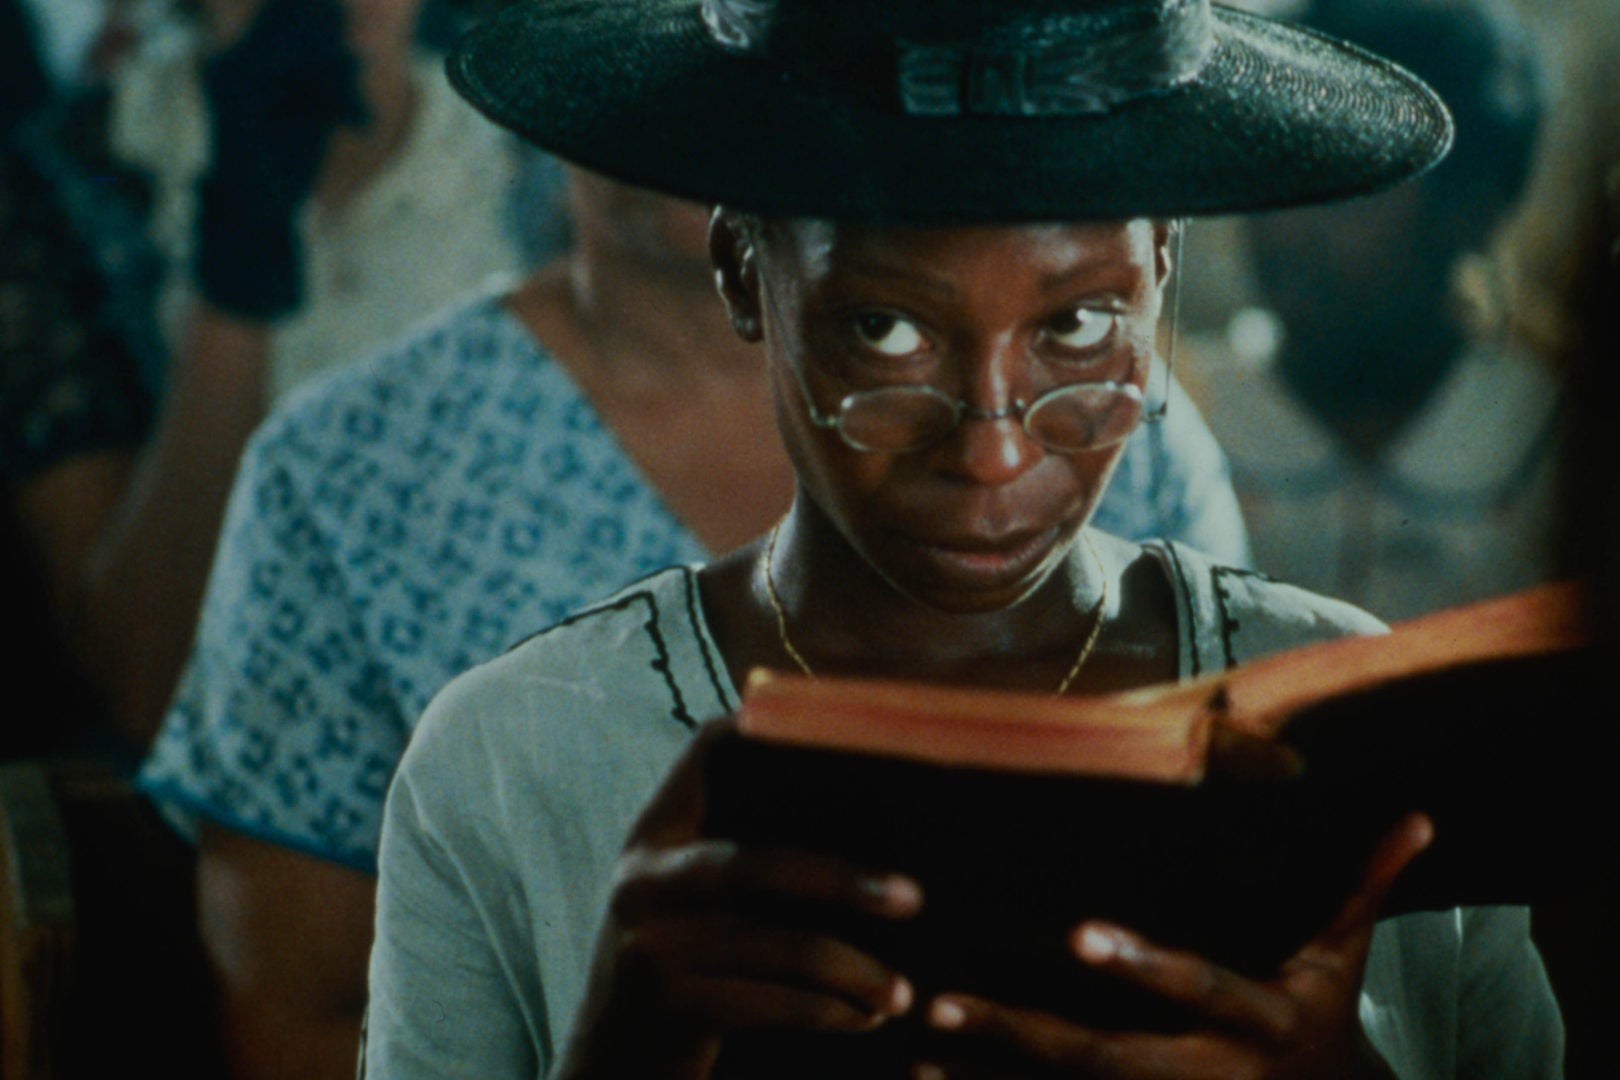 A black woman in a large black hat sits in a church pew looking over her glasses at something off-screen while holding a bible in her hands.